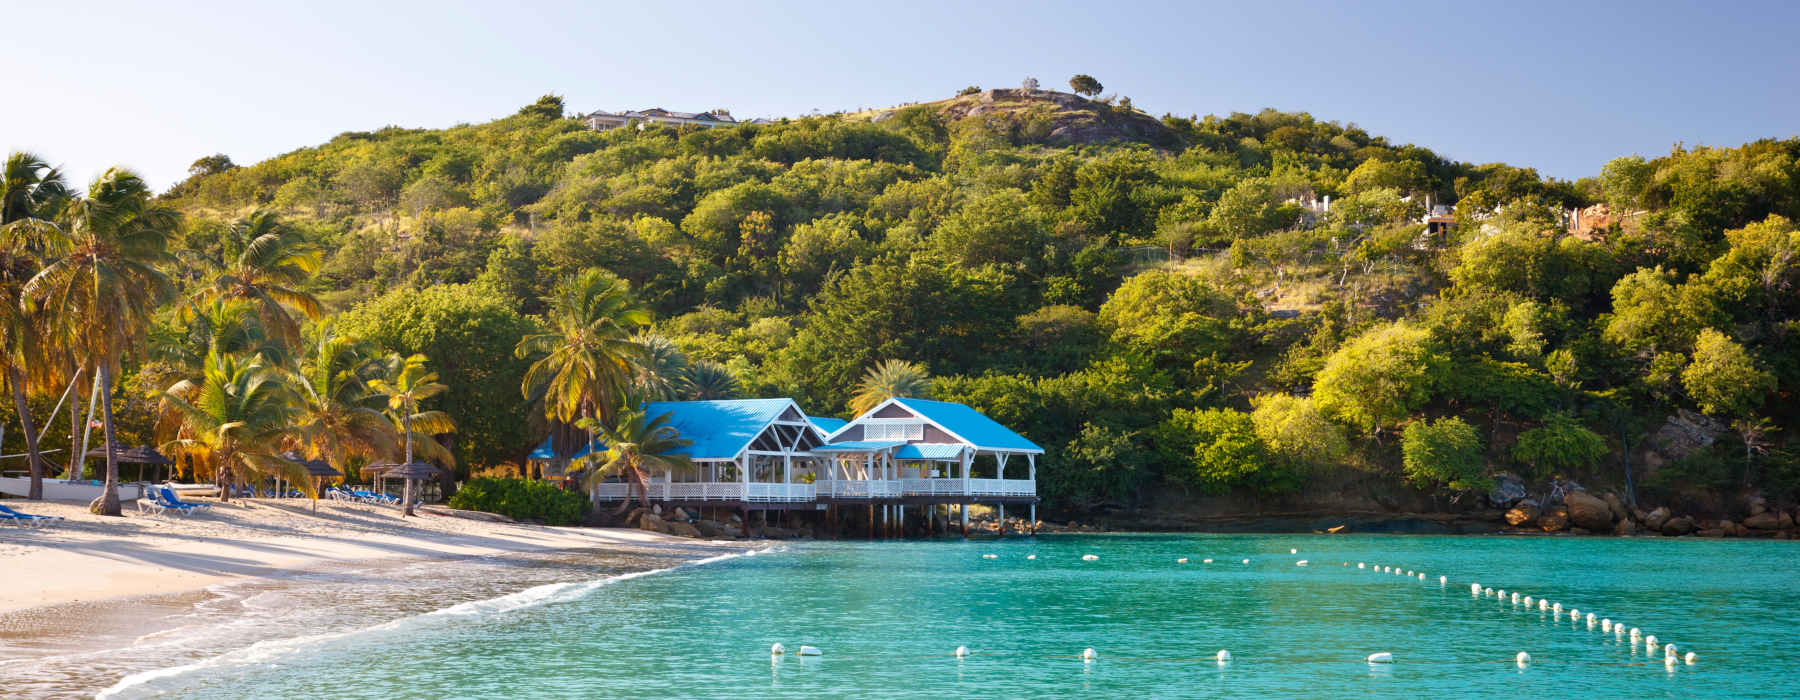 All our Antigua and Barbuda<br class="hidden-md hidden-lg" /> Family Holidays